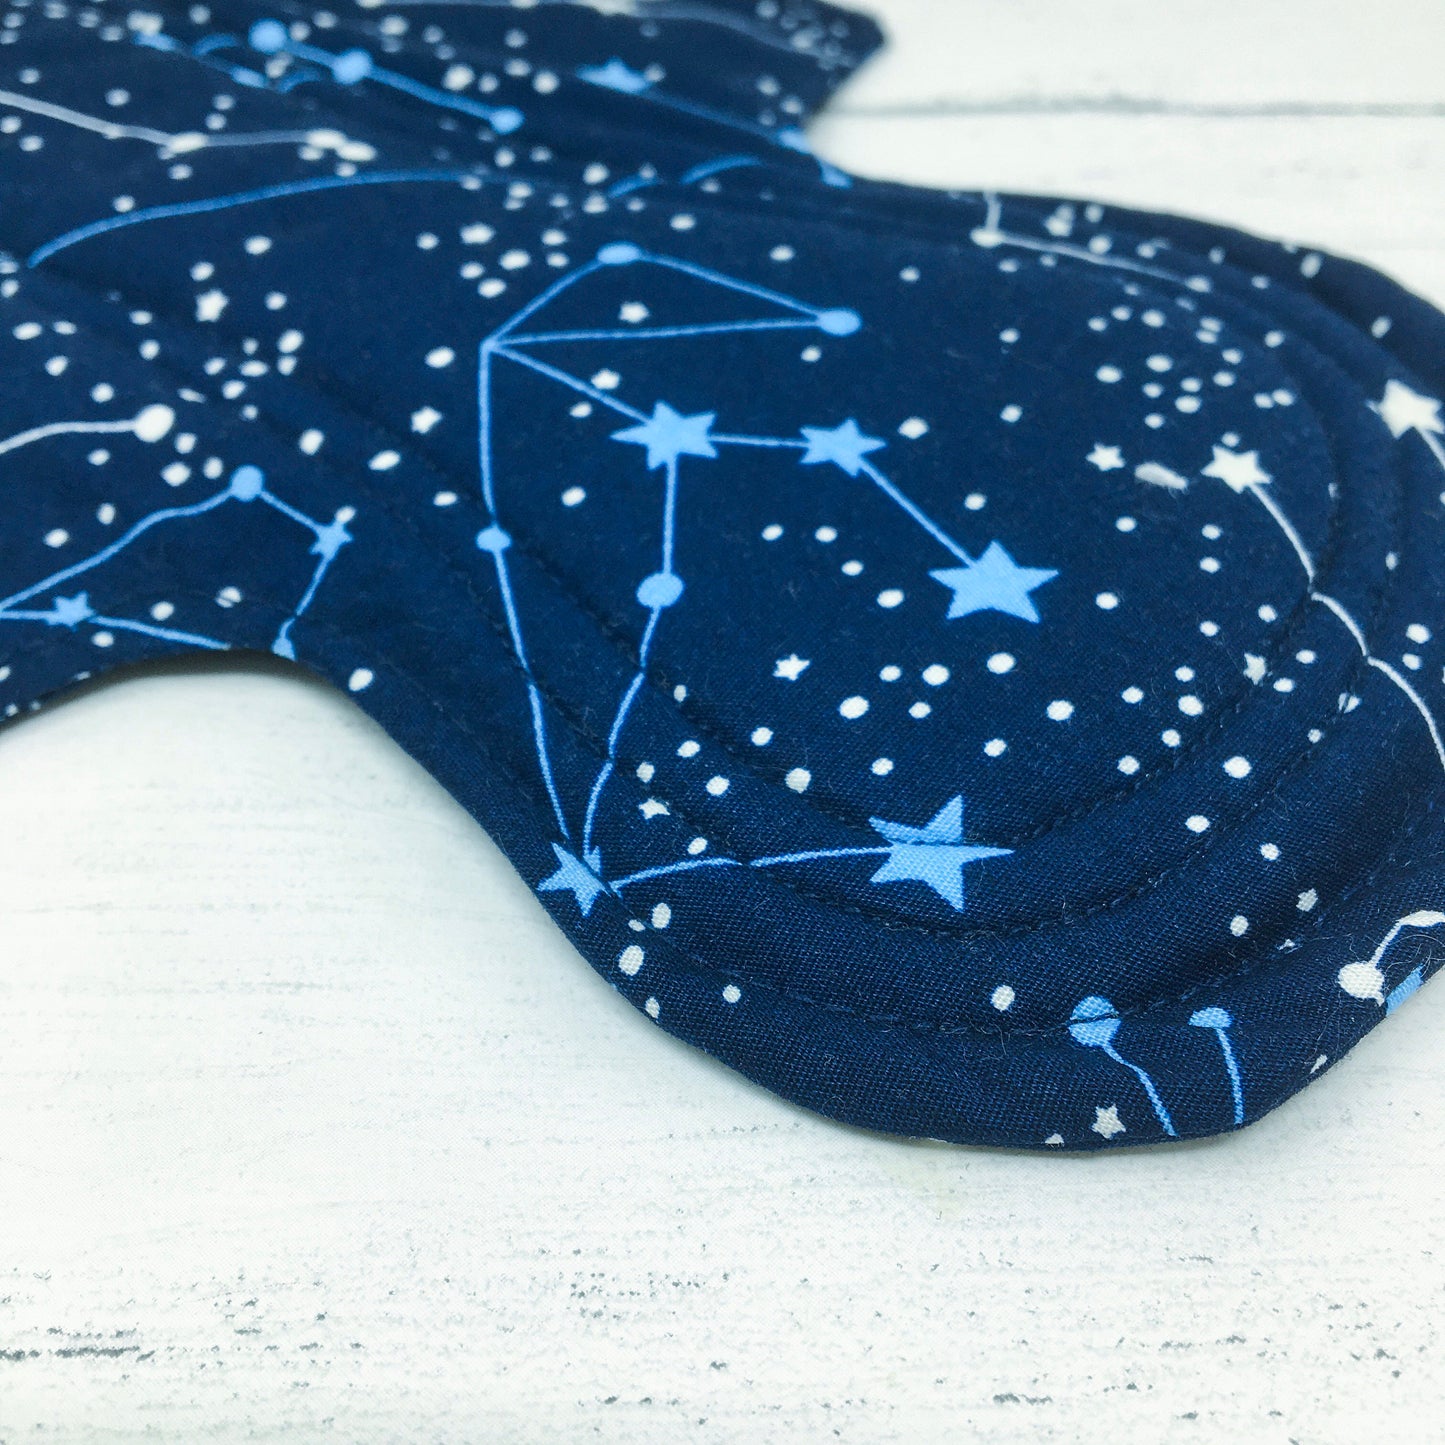 11" Reusable menstrual pad with pattern of constellations on a navy cotton fabric. Close up view of stitching